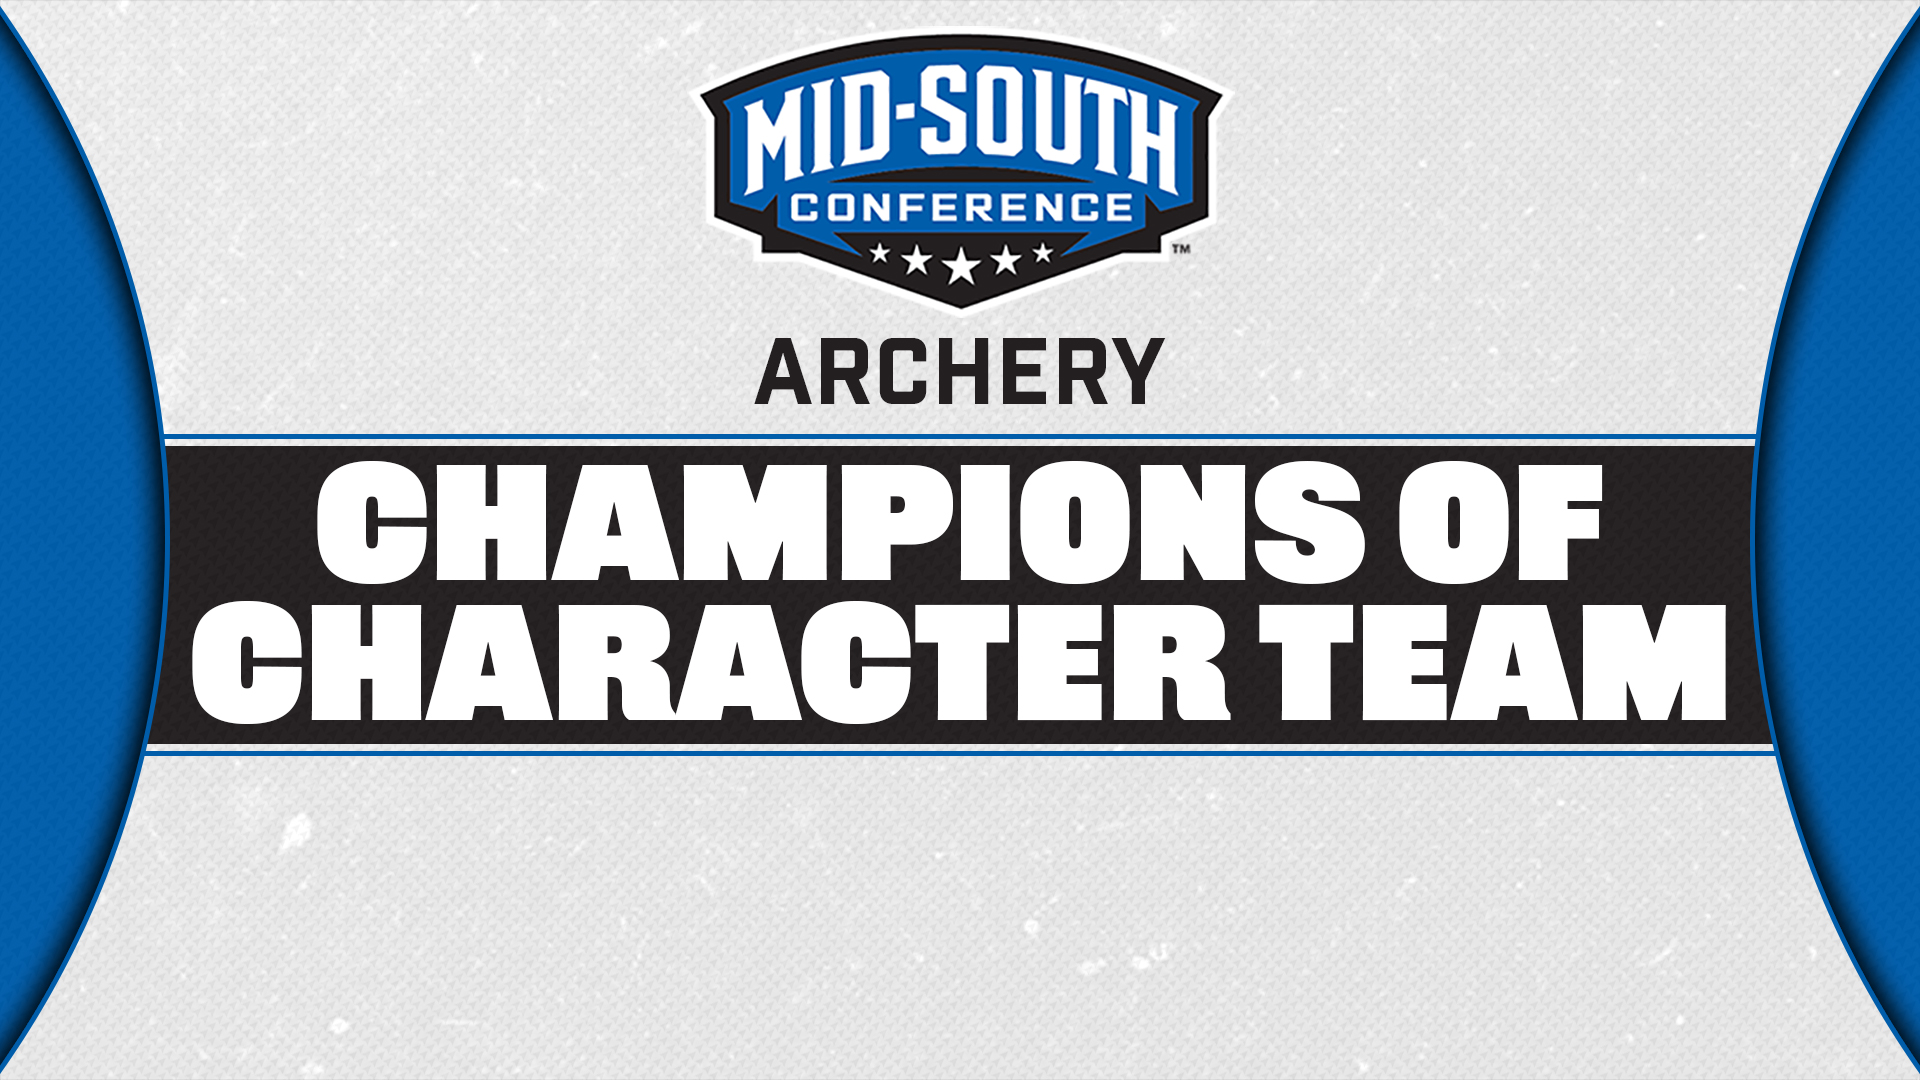 Mid-South Conference Announces Archery Champions of Character Team